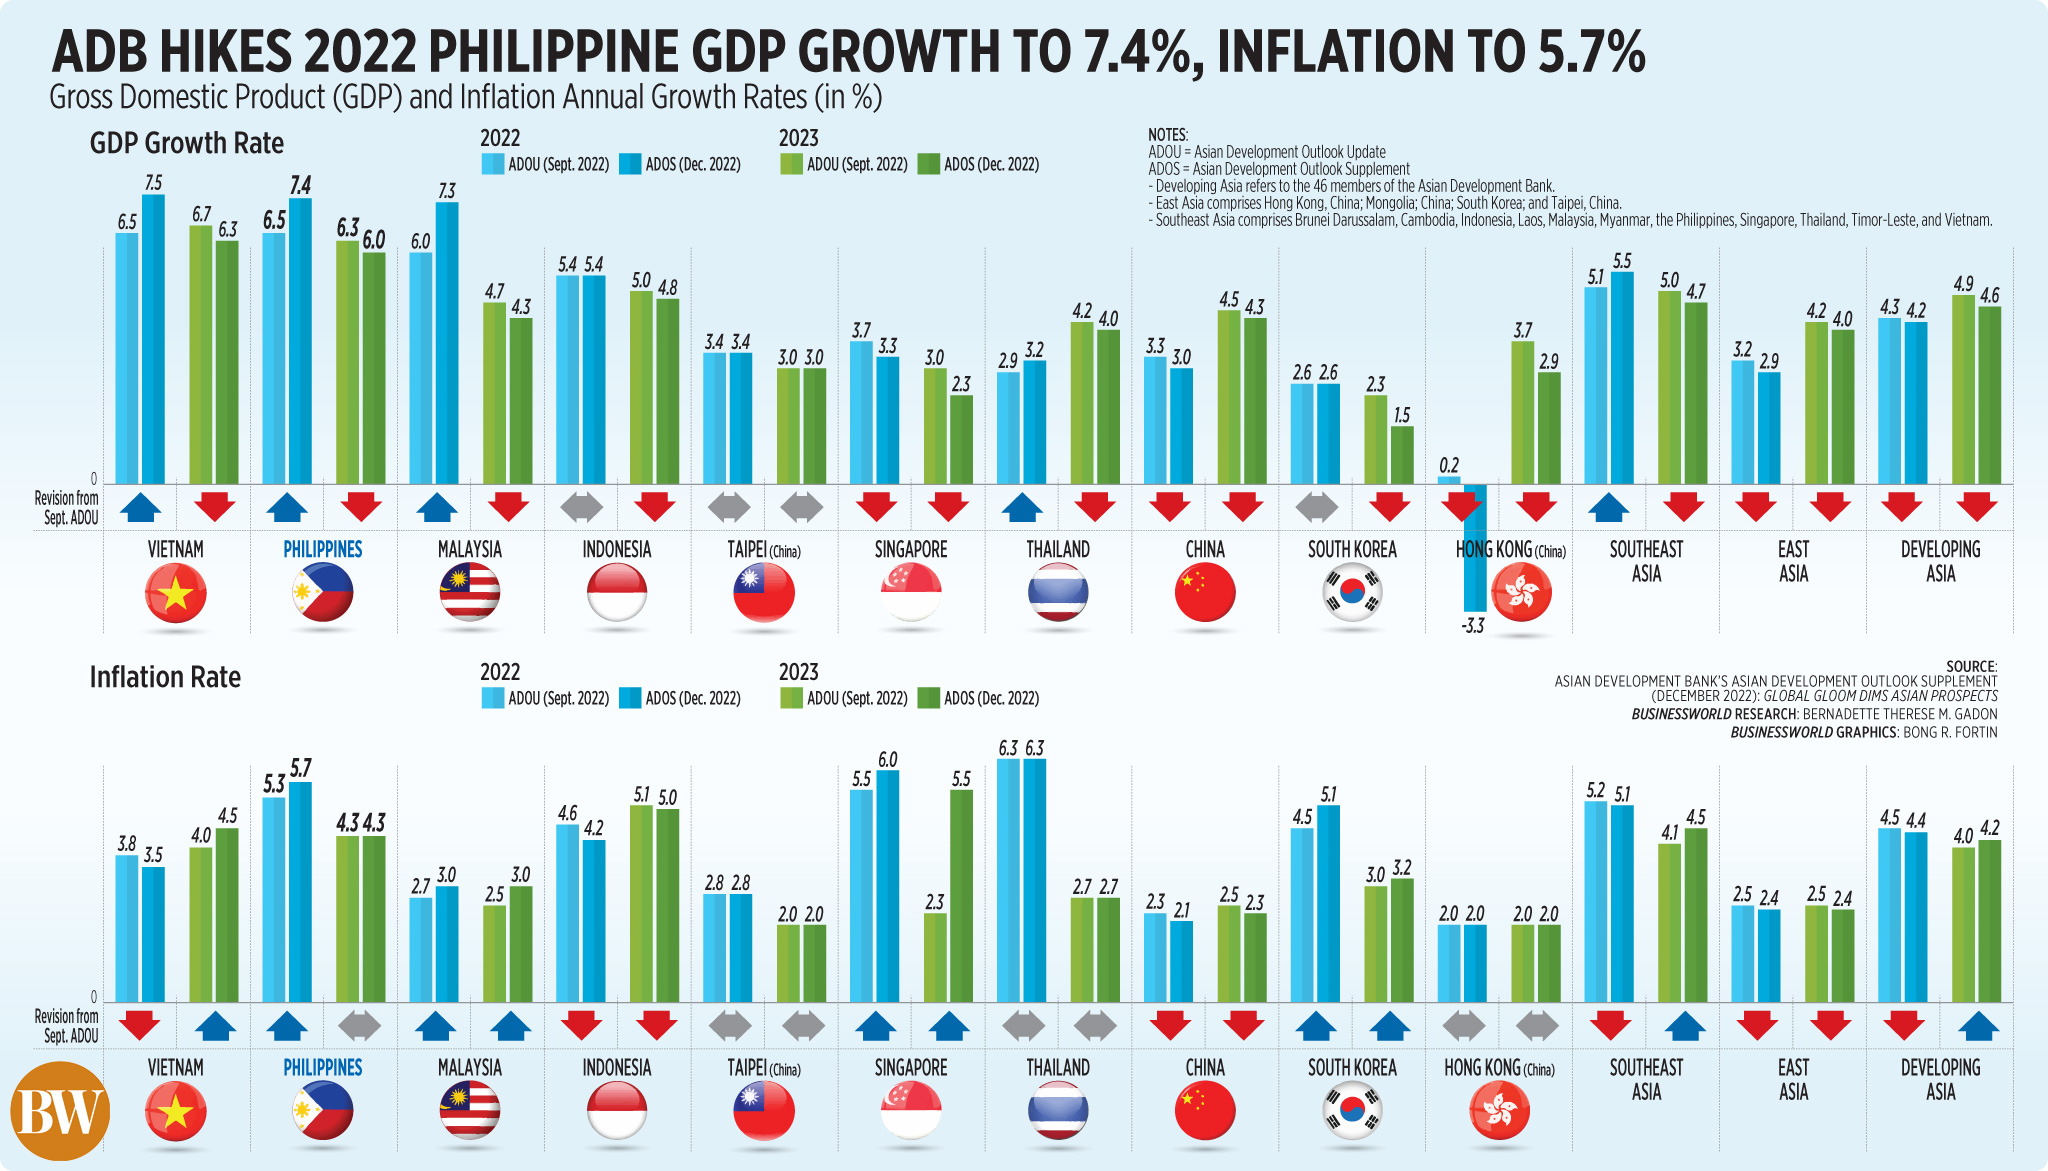 ADB hikes 2022 Philippine GDP growth to 7.4%, inflation to 5.7%